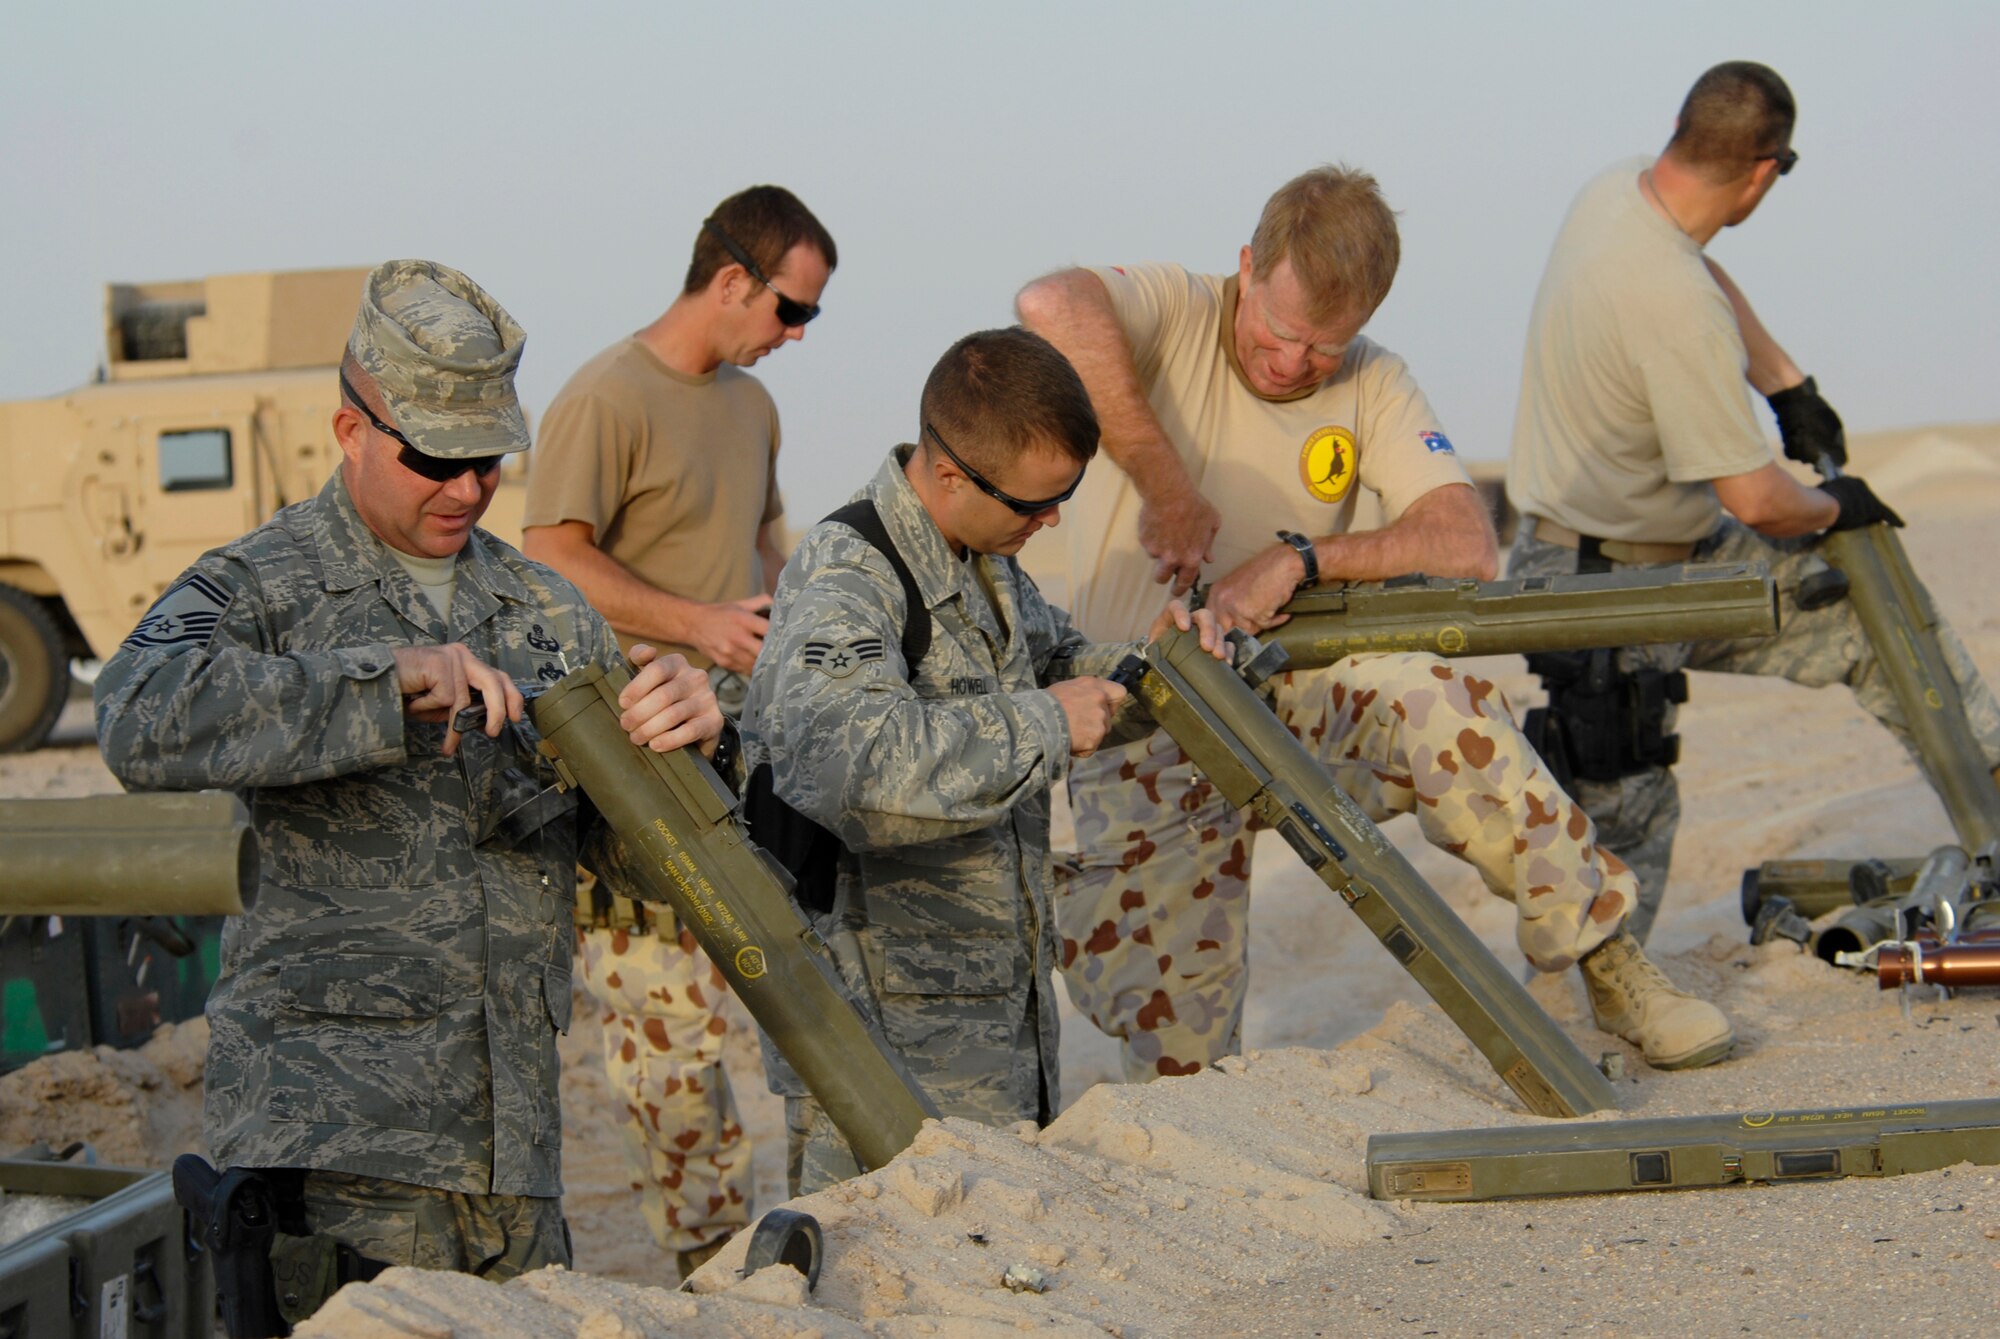 SOUTHWEST ASIA -- Members from the 386th Expeditionary Civil Engineer Squadron explosive ordnance disposal flight and Australian Army ammunition technicians prepare light anti-armor weapon rockets for disposal during a controlled detonation June 20, 2008, at an EOD range in the Persian Gulf Region.  The controlled detonation is destroying unserviceable munitions. The joint detonation also provided an opportunity for the coalition forces to enhance relations while learning some of the slight differences in operating procedures. (U.S. Air Force photo/ Staff Sgt. Patrick Dixon)